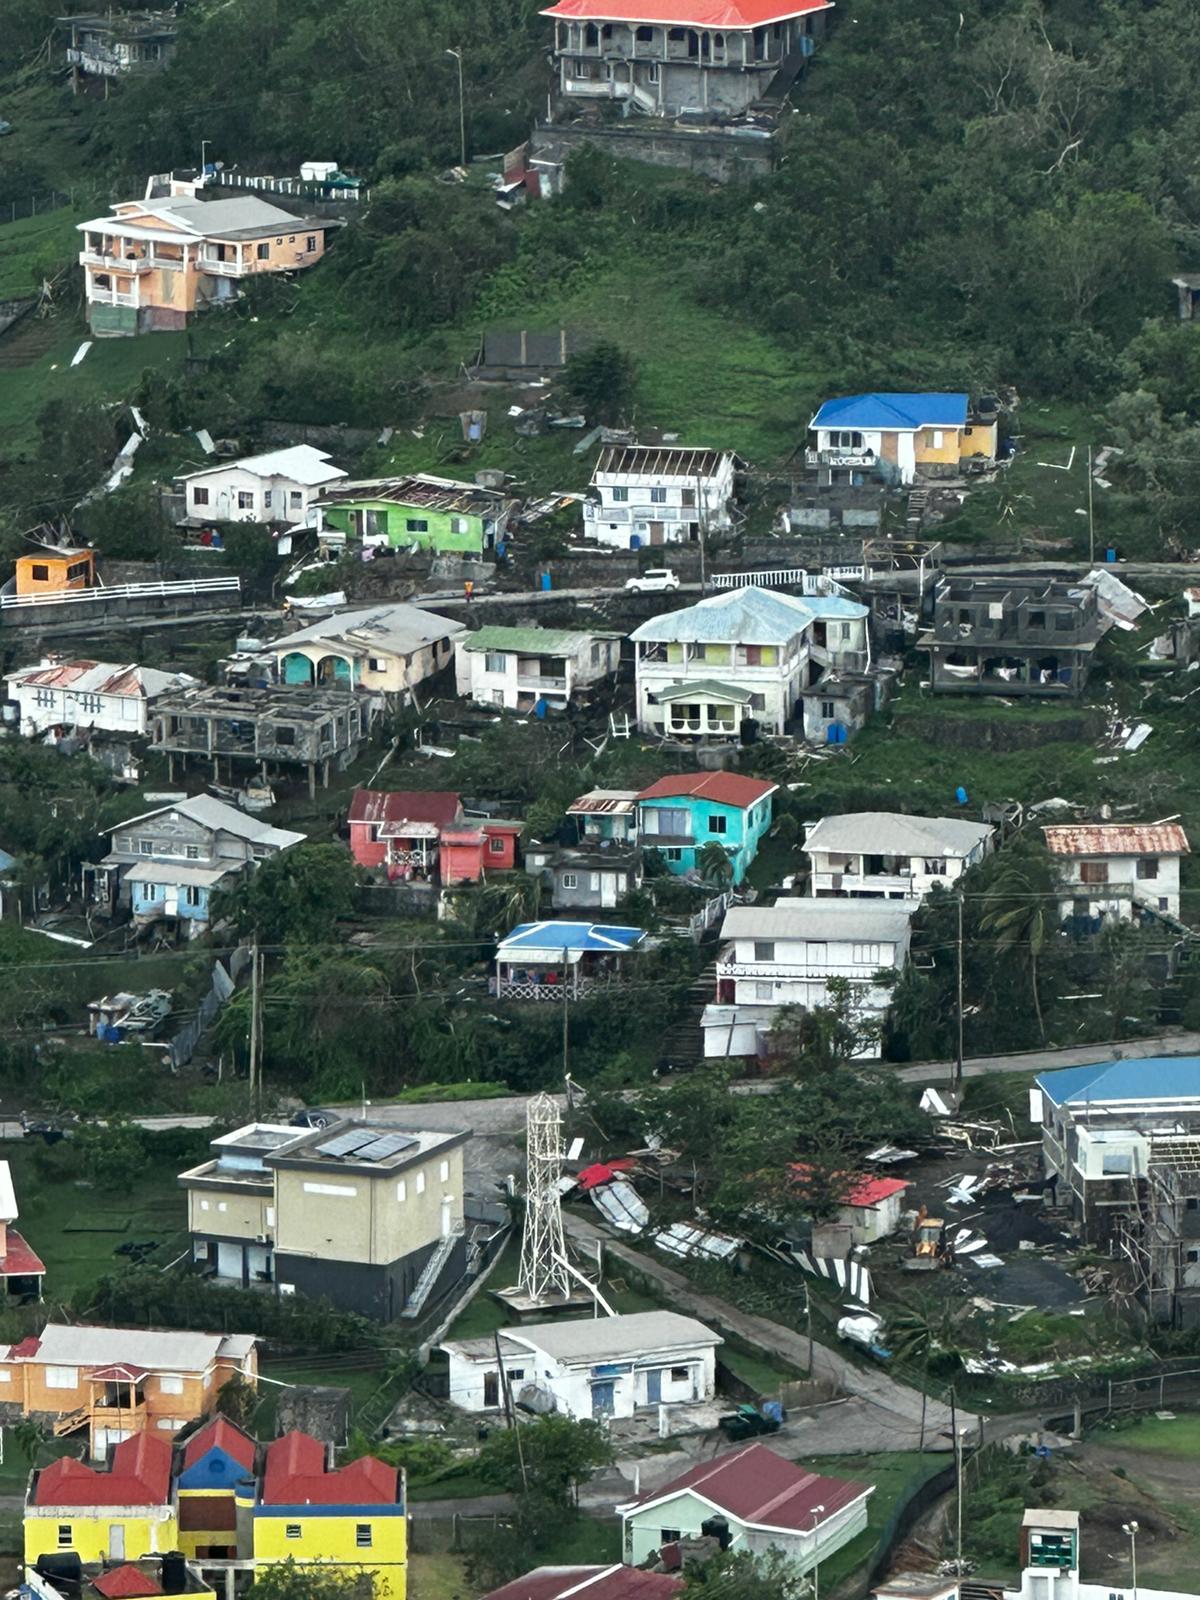 Hurricane Beryl destroyed hundreds of buildings and killed six people when it ripped through the eastern Caribbean, including the island of Bequia, pictured